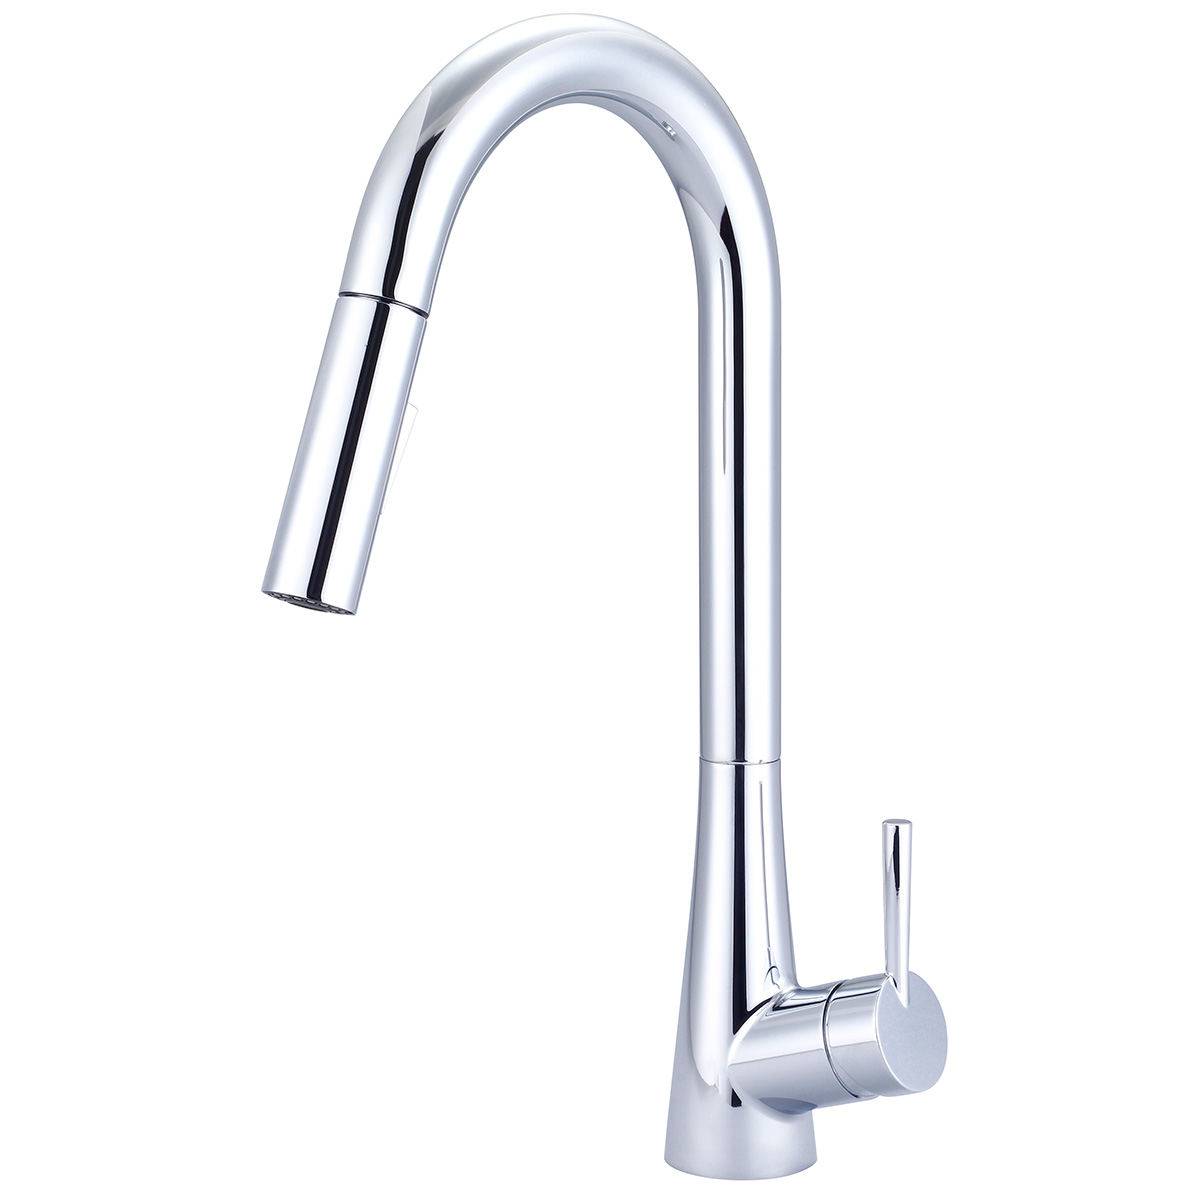 I2 K-5025 7.62 In. Single Handle Pull-down Kitchen Faucet - Chrome